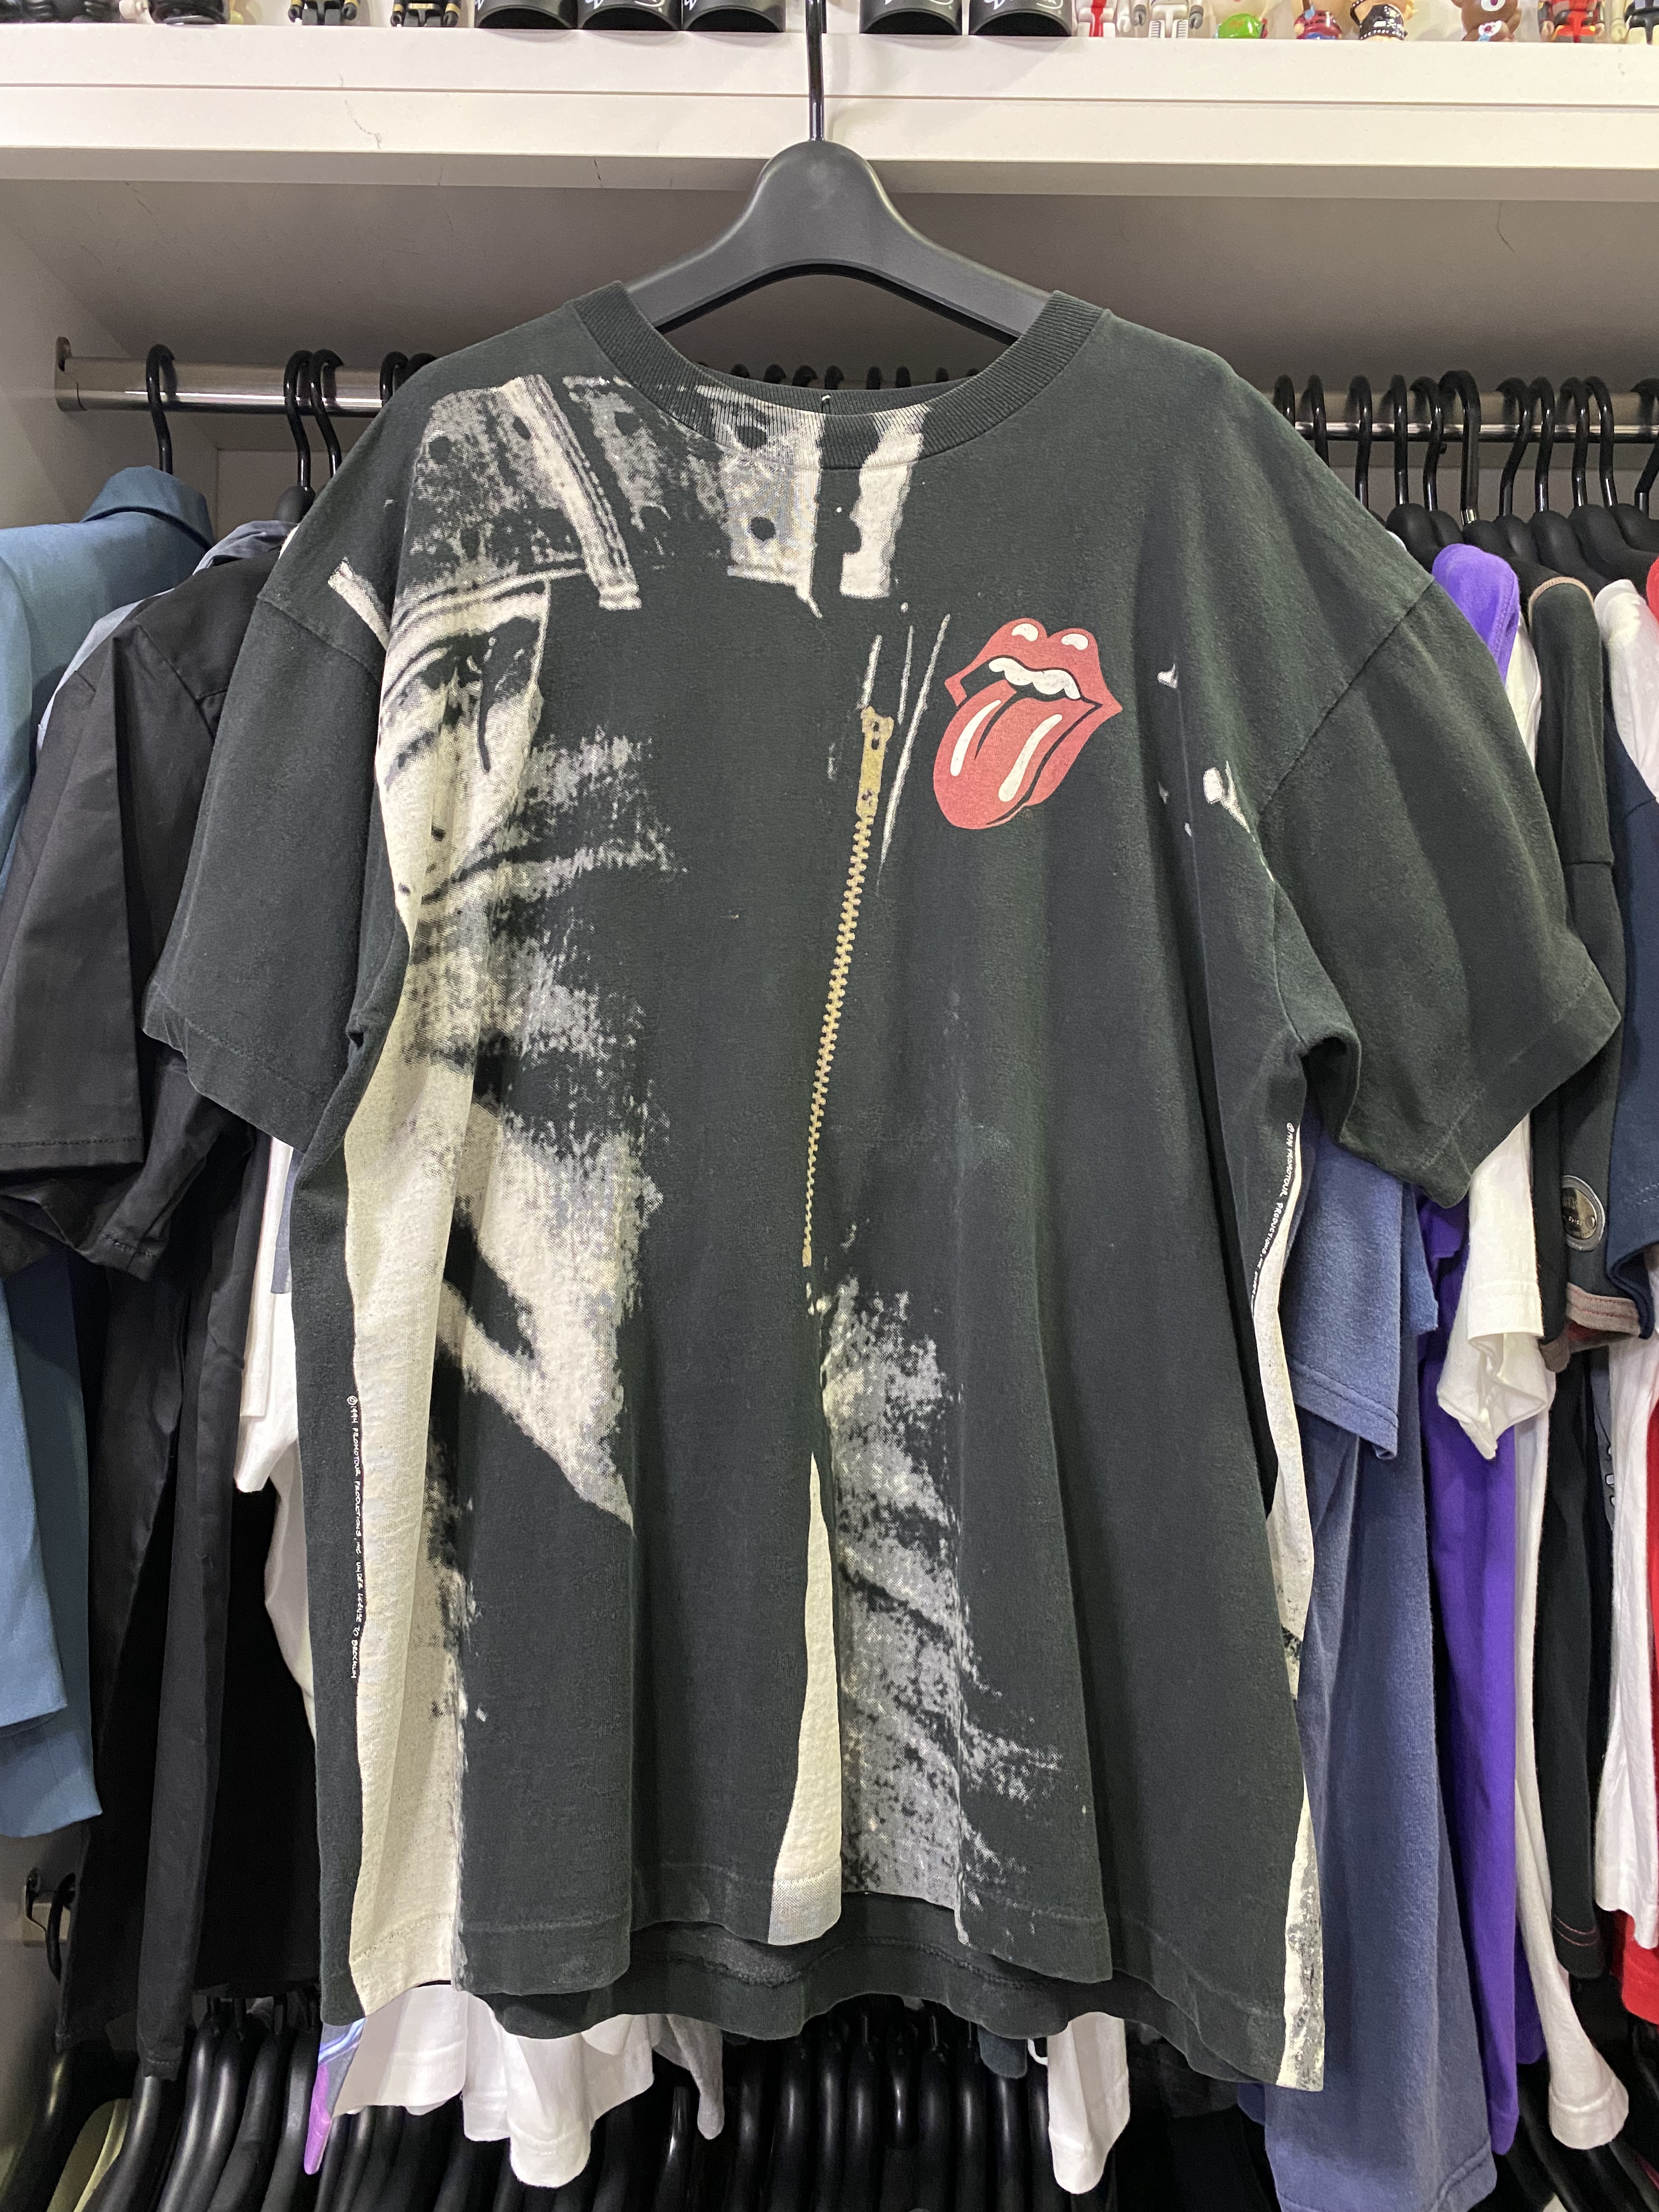 Rolling Stones Sticky Fingers Tシャツ👖